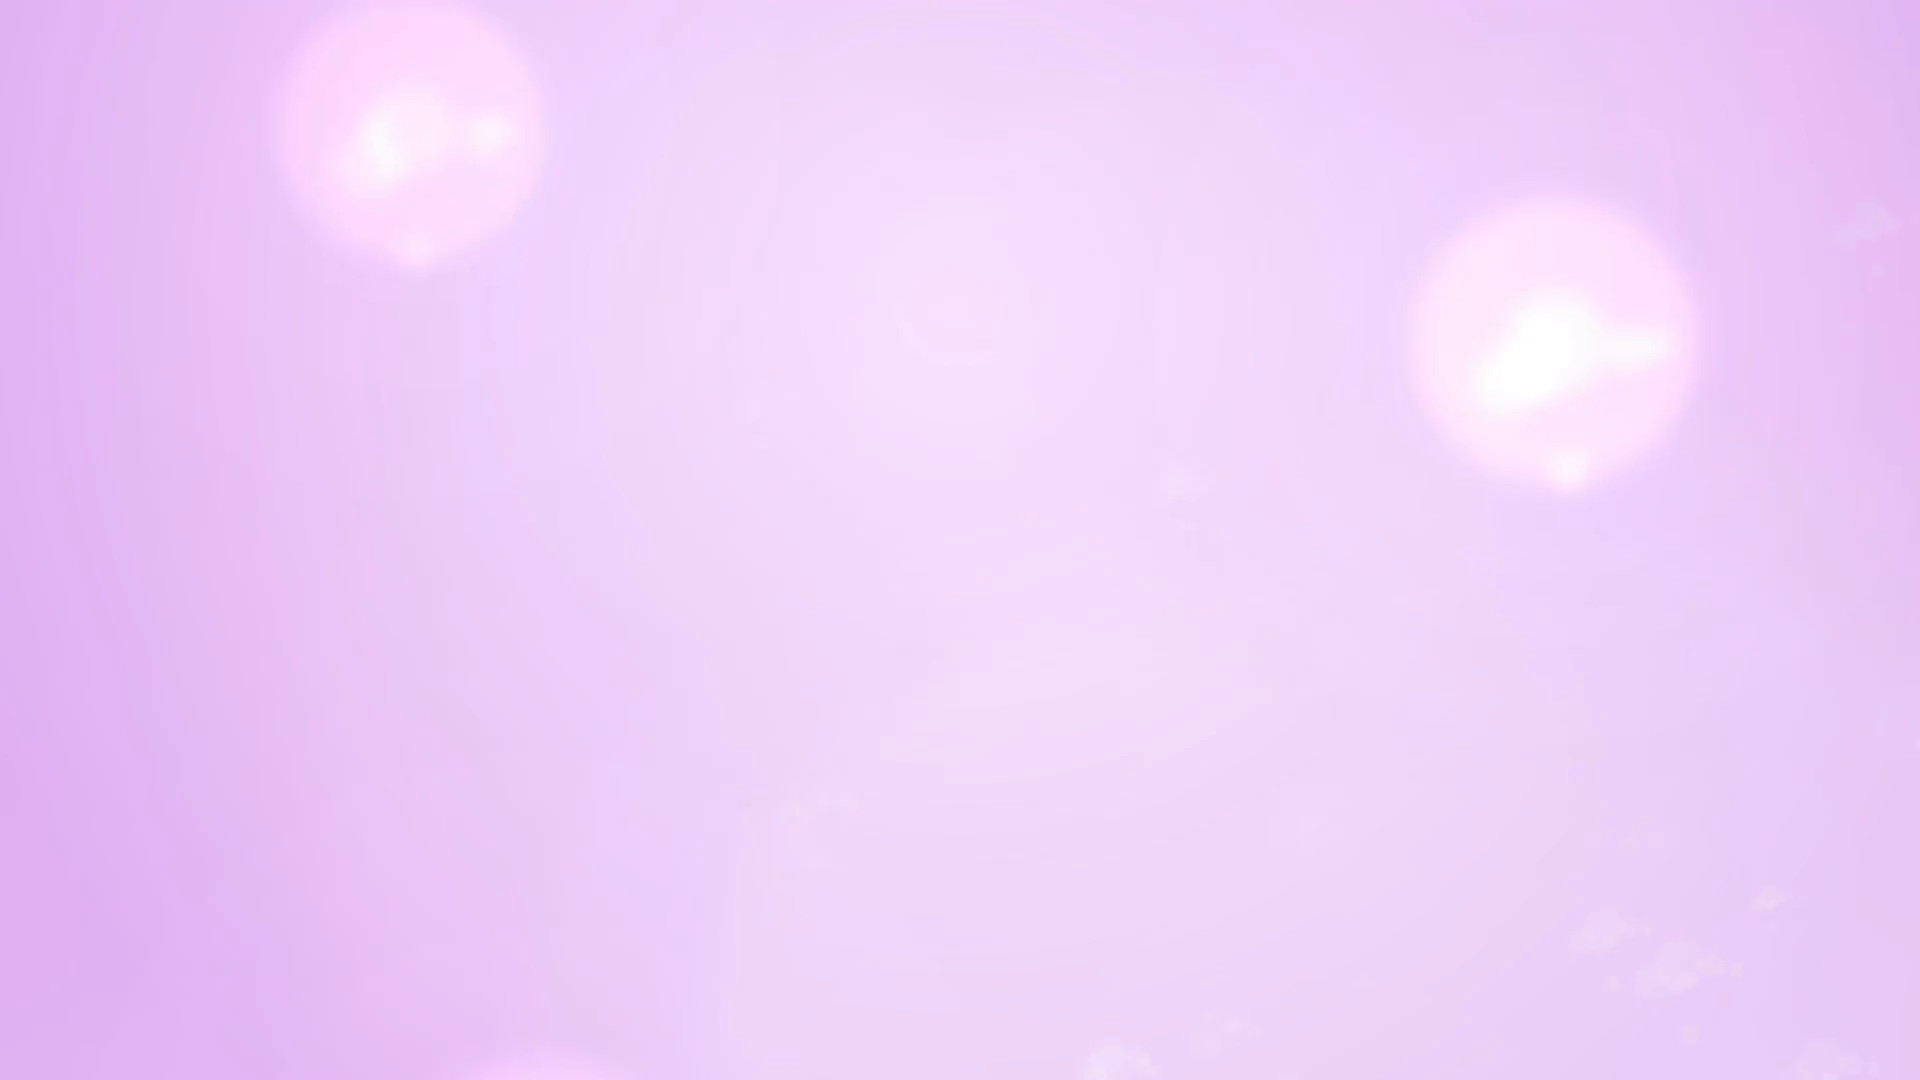 Subscription Library Bokeh Light Particles on Soft Pink Background as Backdrop Motion Layer for Animation, full